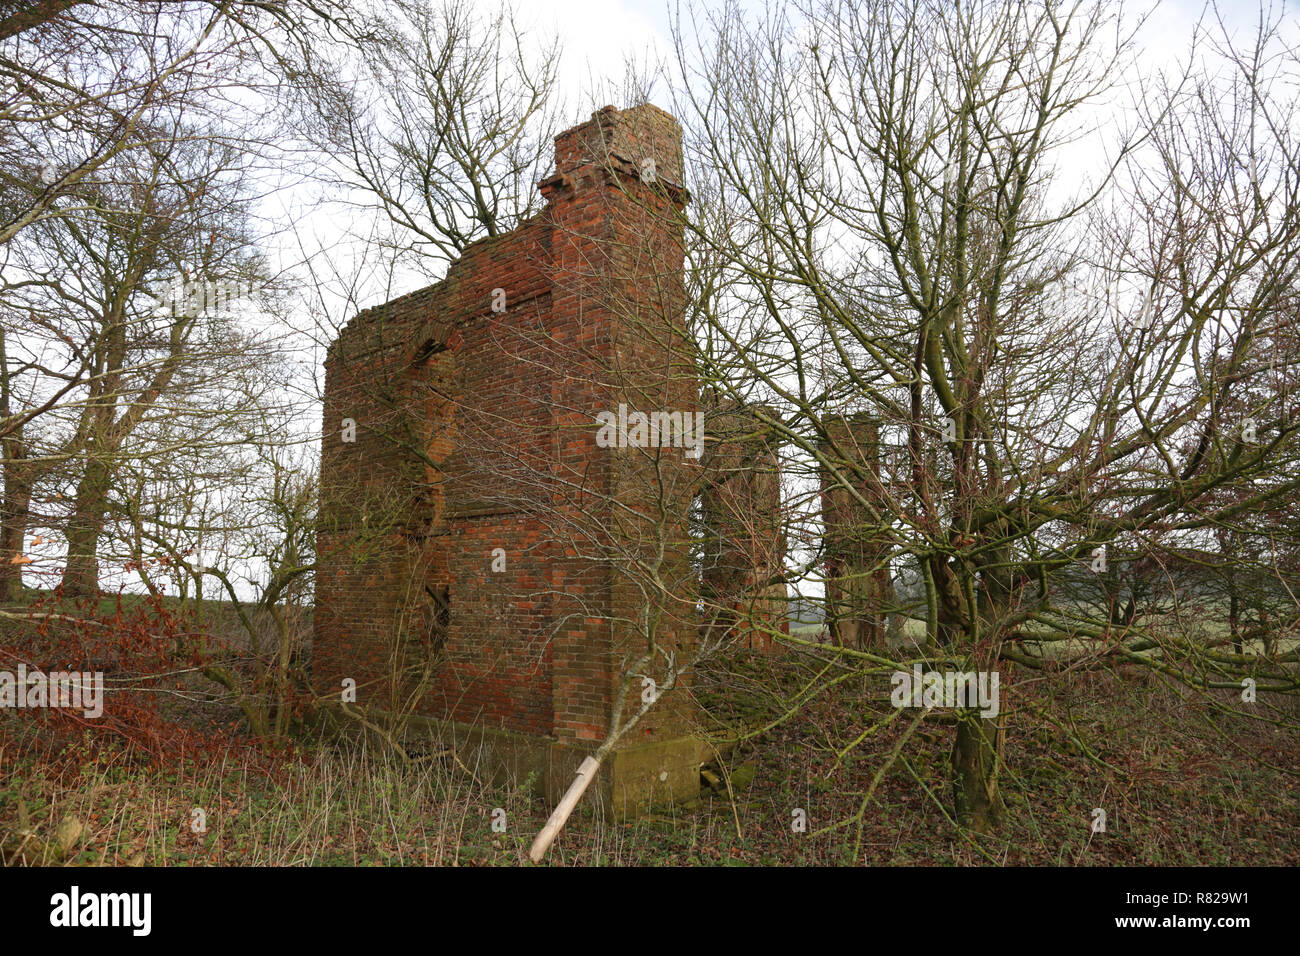 Derelict building on the Sheepwalks, Enville, Staffordshire, England,UK. Stock Photo